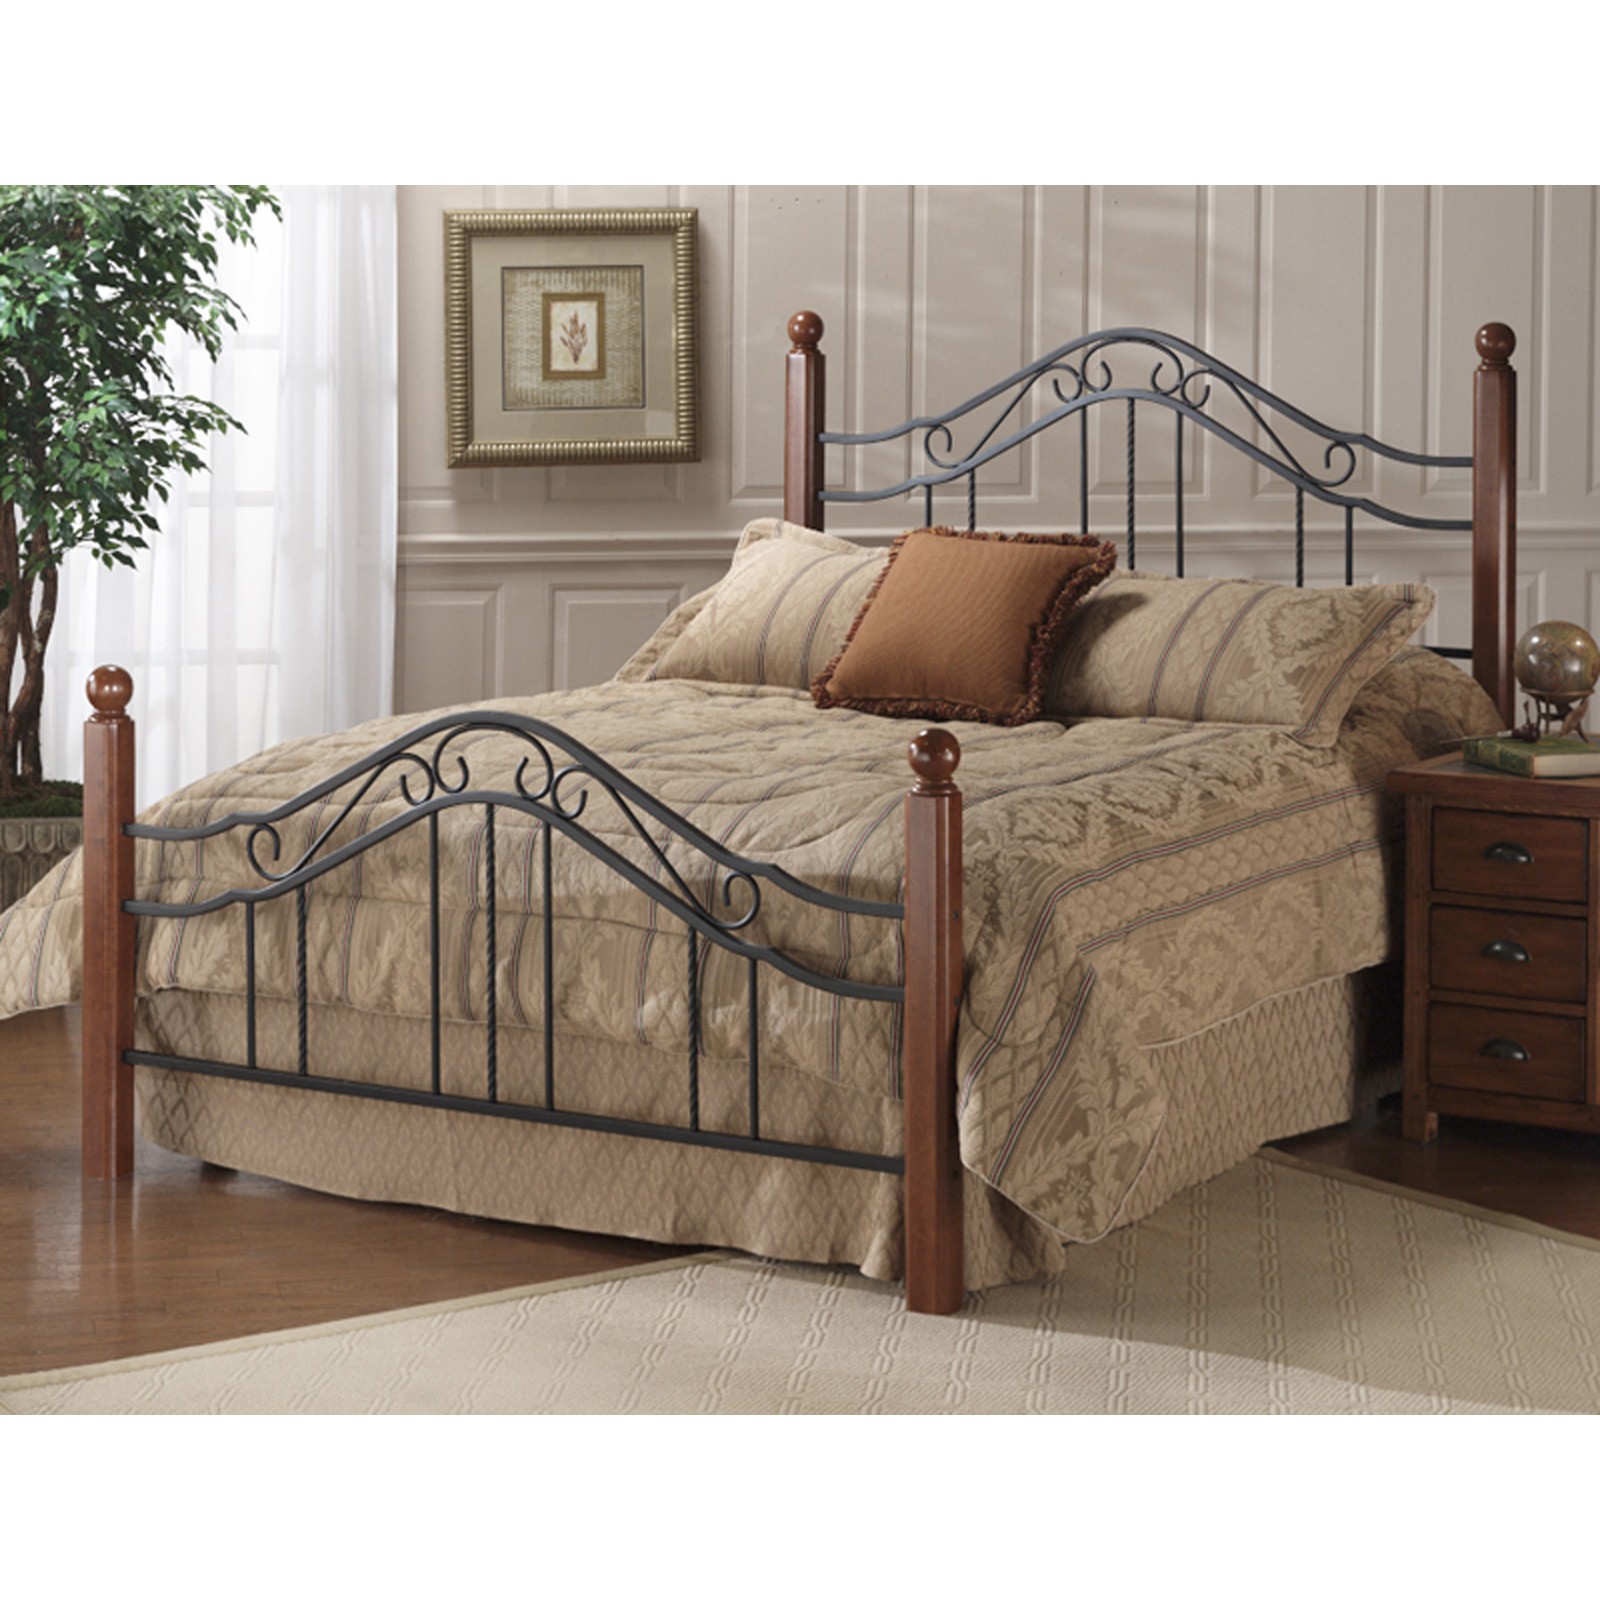 Classic wood and wrought iron king size poster bed headboard